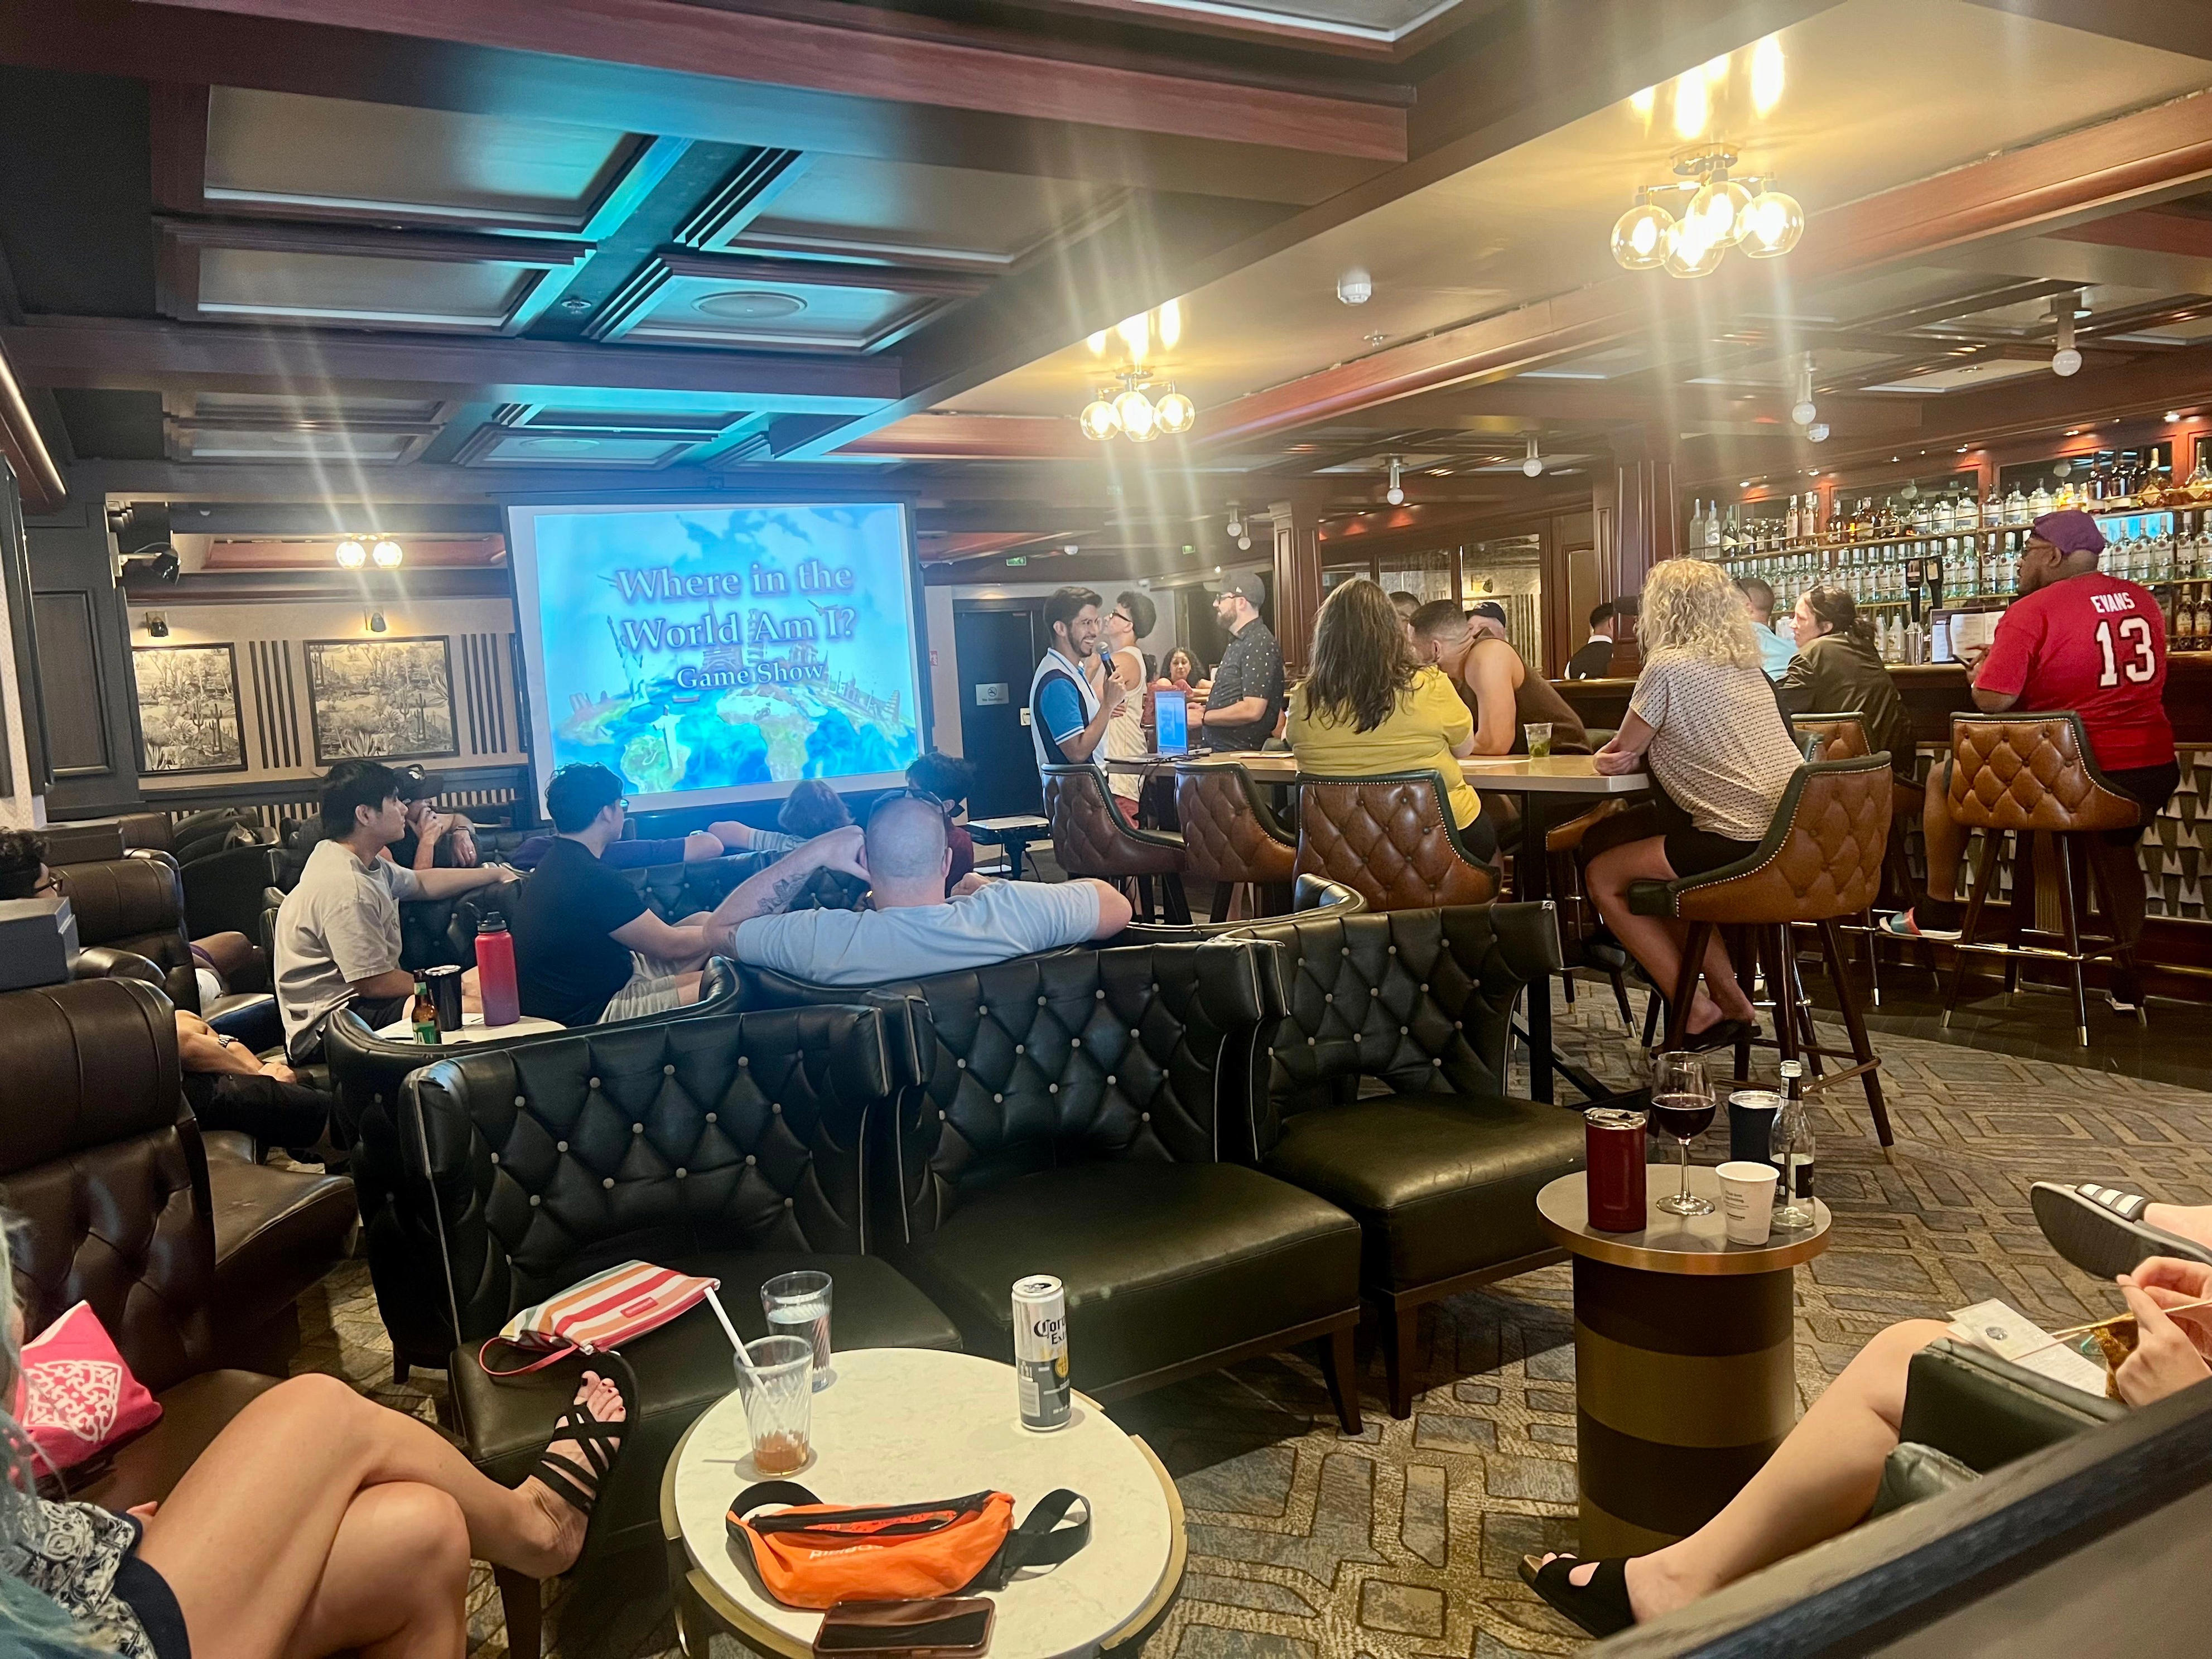 <p>There were other themed trivia throughout the weekend, like car logos and "airlines of the world."</p><p>I go to a lot of pub trivia at home, and there are never any aviation-themed questions — so I was thrilled to see airlines.</p>